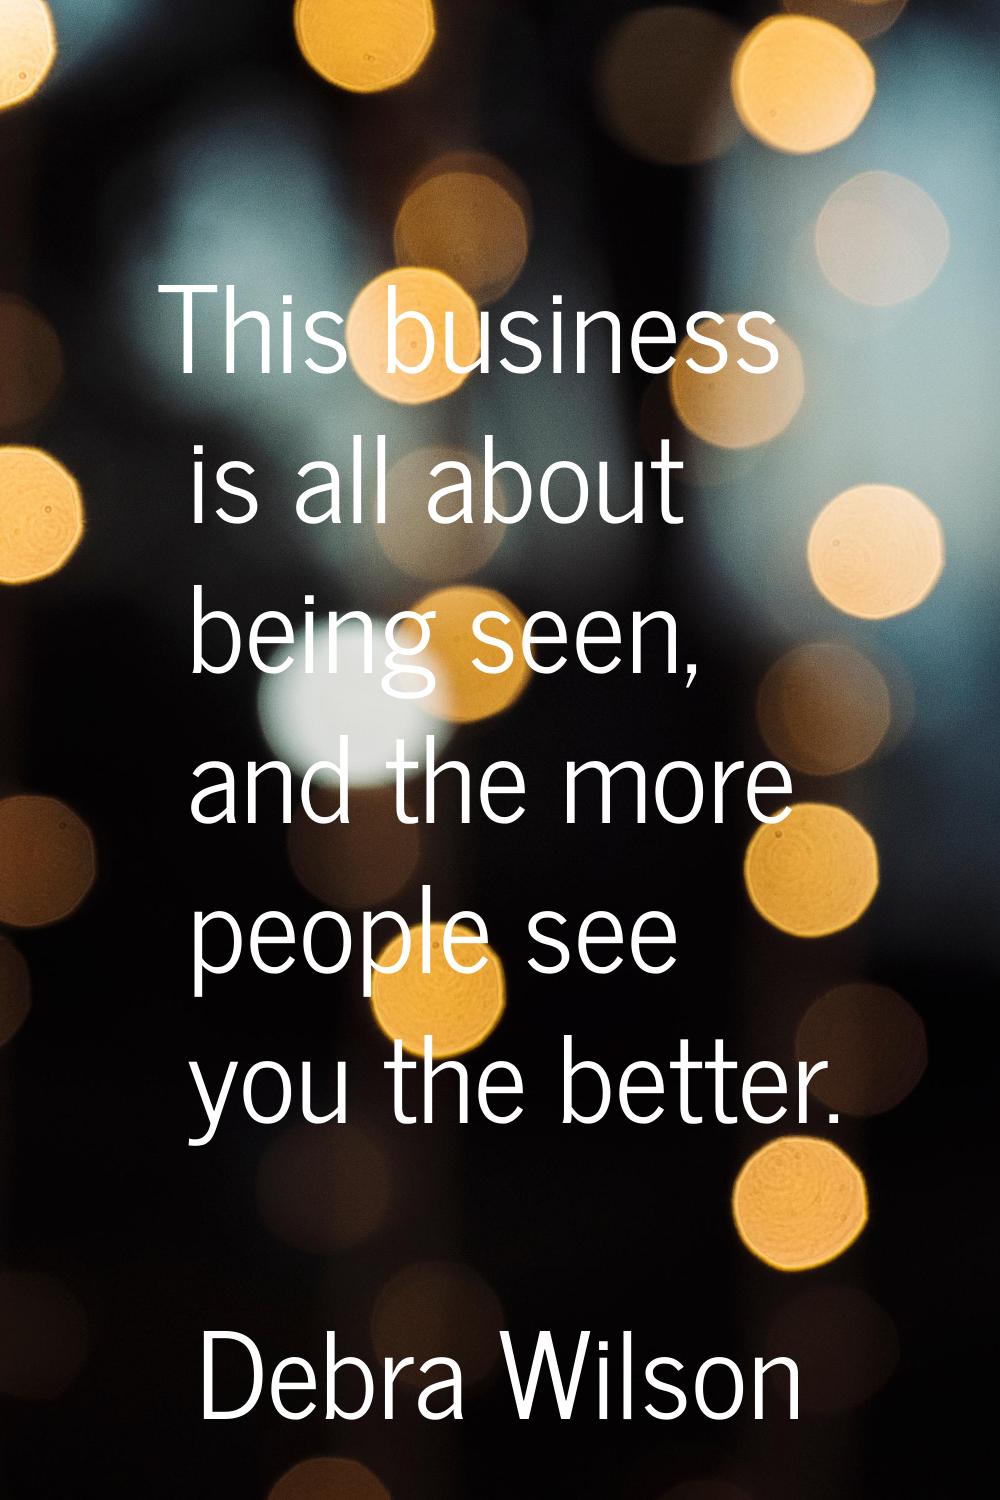 This business is all about being seen, and the more people see you the better.